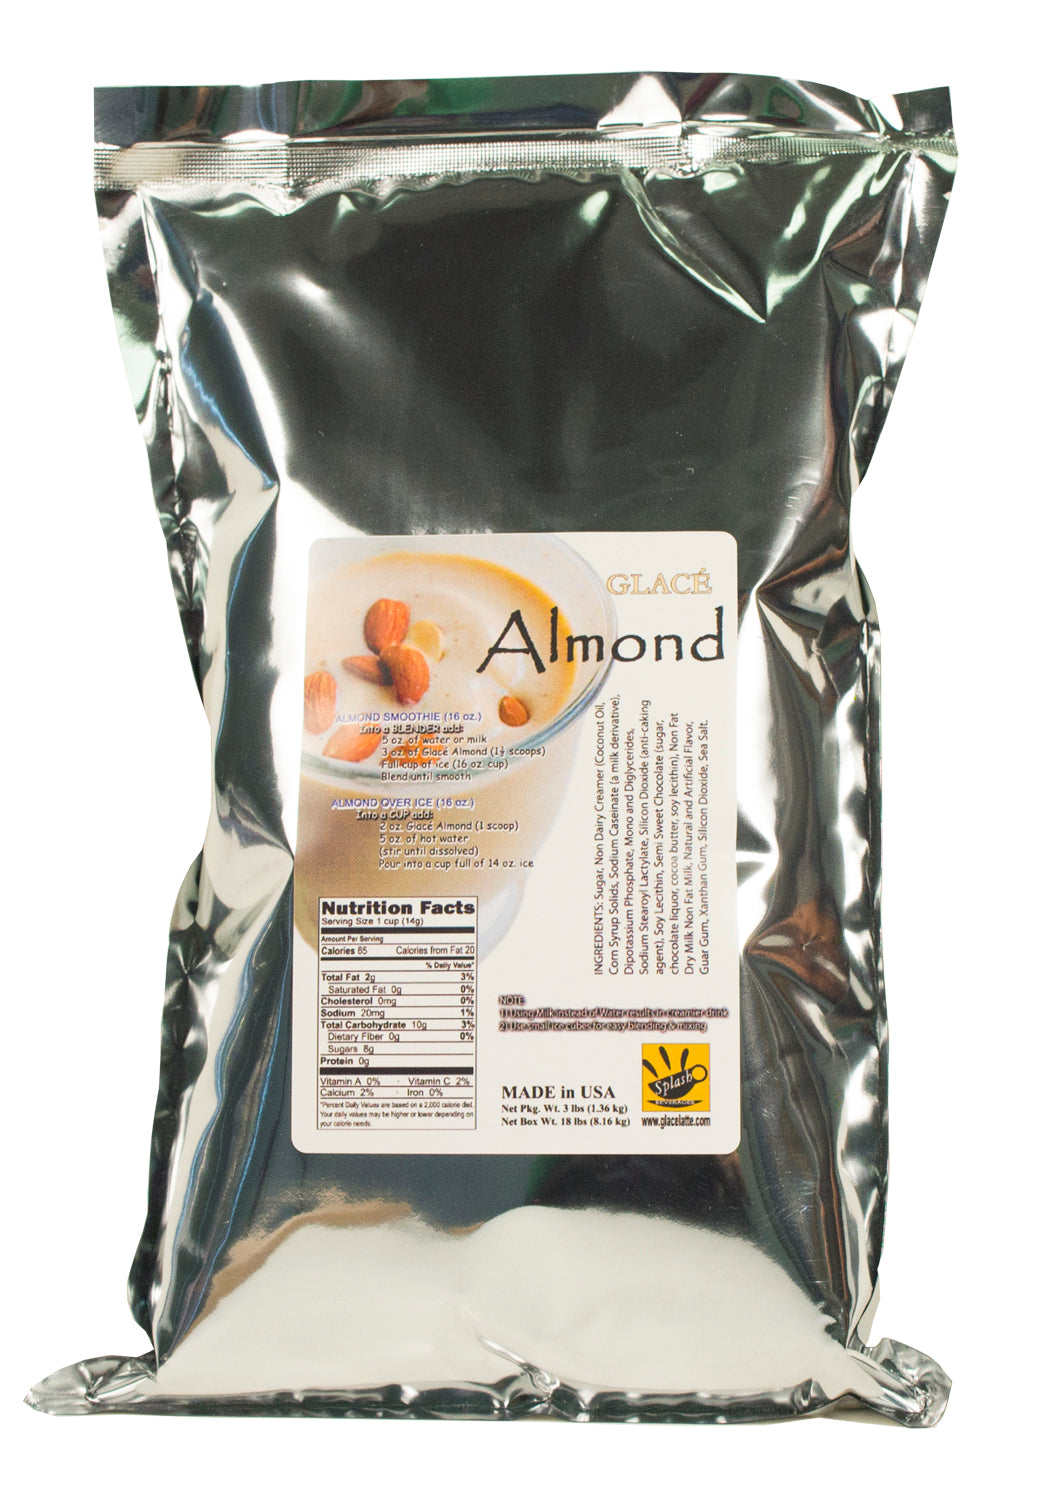 Almond 4 in 1 Bubble Tea / Latte and Frappe Mix - Made in the USA